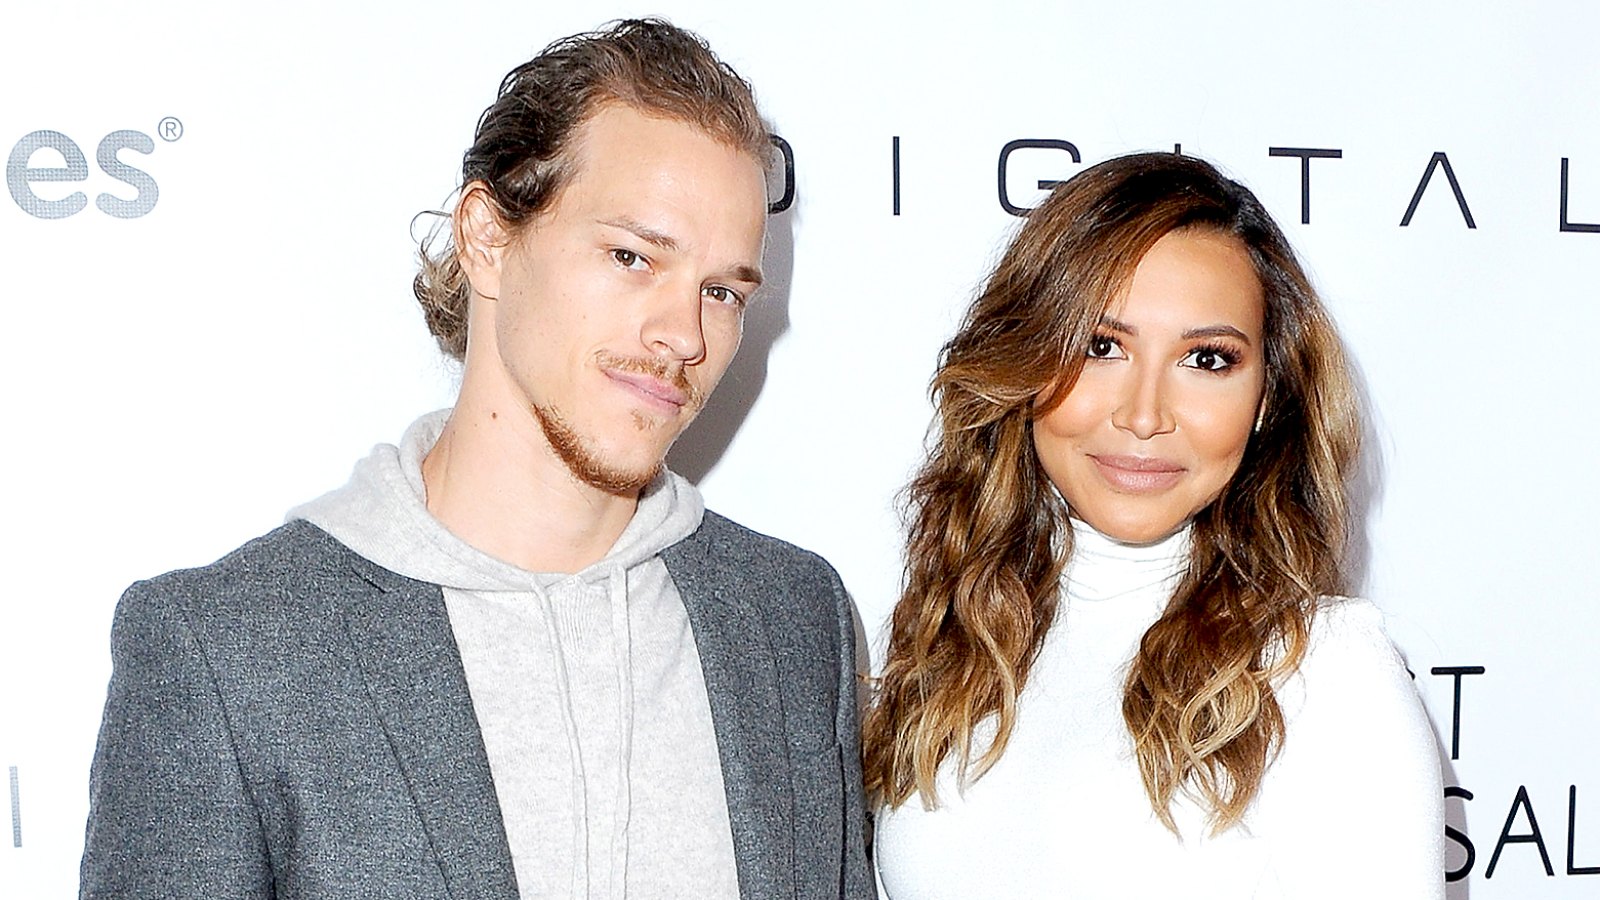 Ryan Dorsey and Naya Rivera arrive at the 2015 March Of Dimes Celebration Of Babies at the Beverly Wilshire Four Seasons Hotel on December 4, 2015 in Beverly Hills, California.